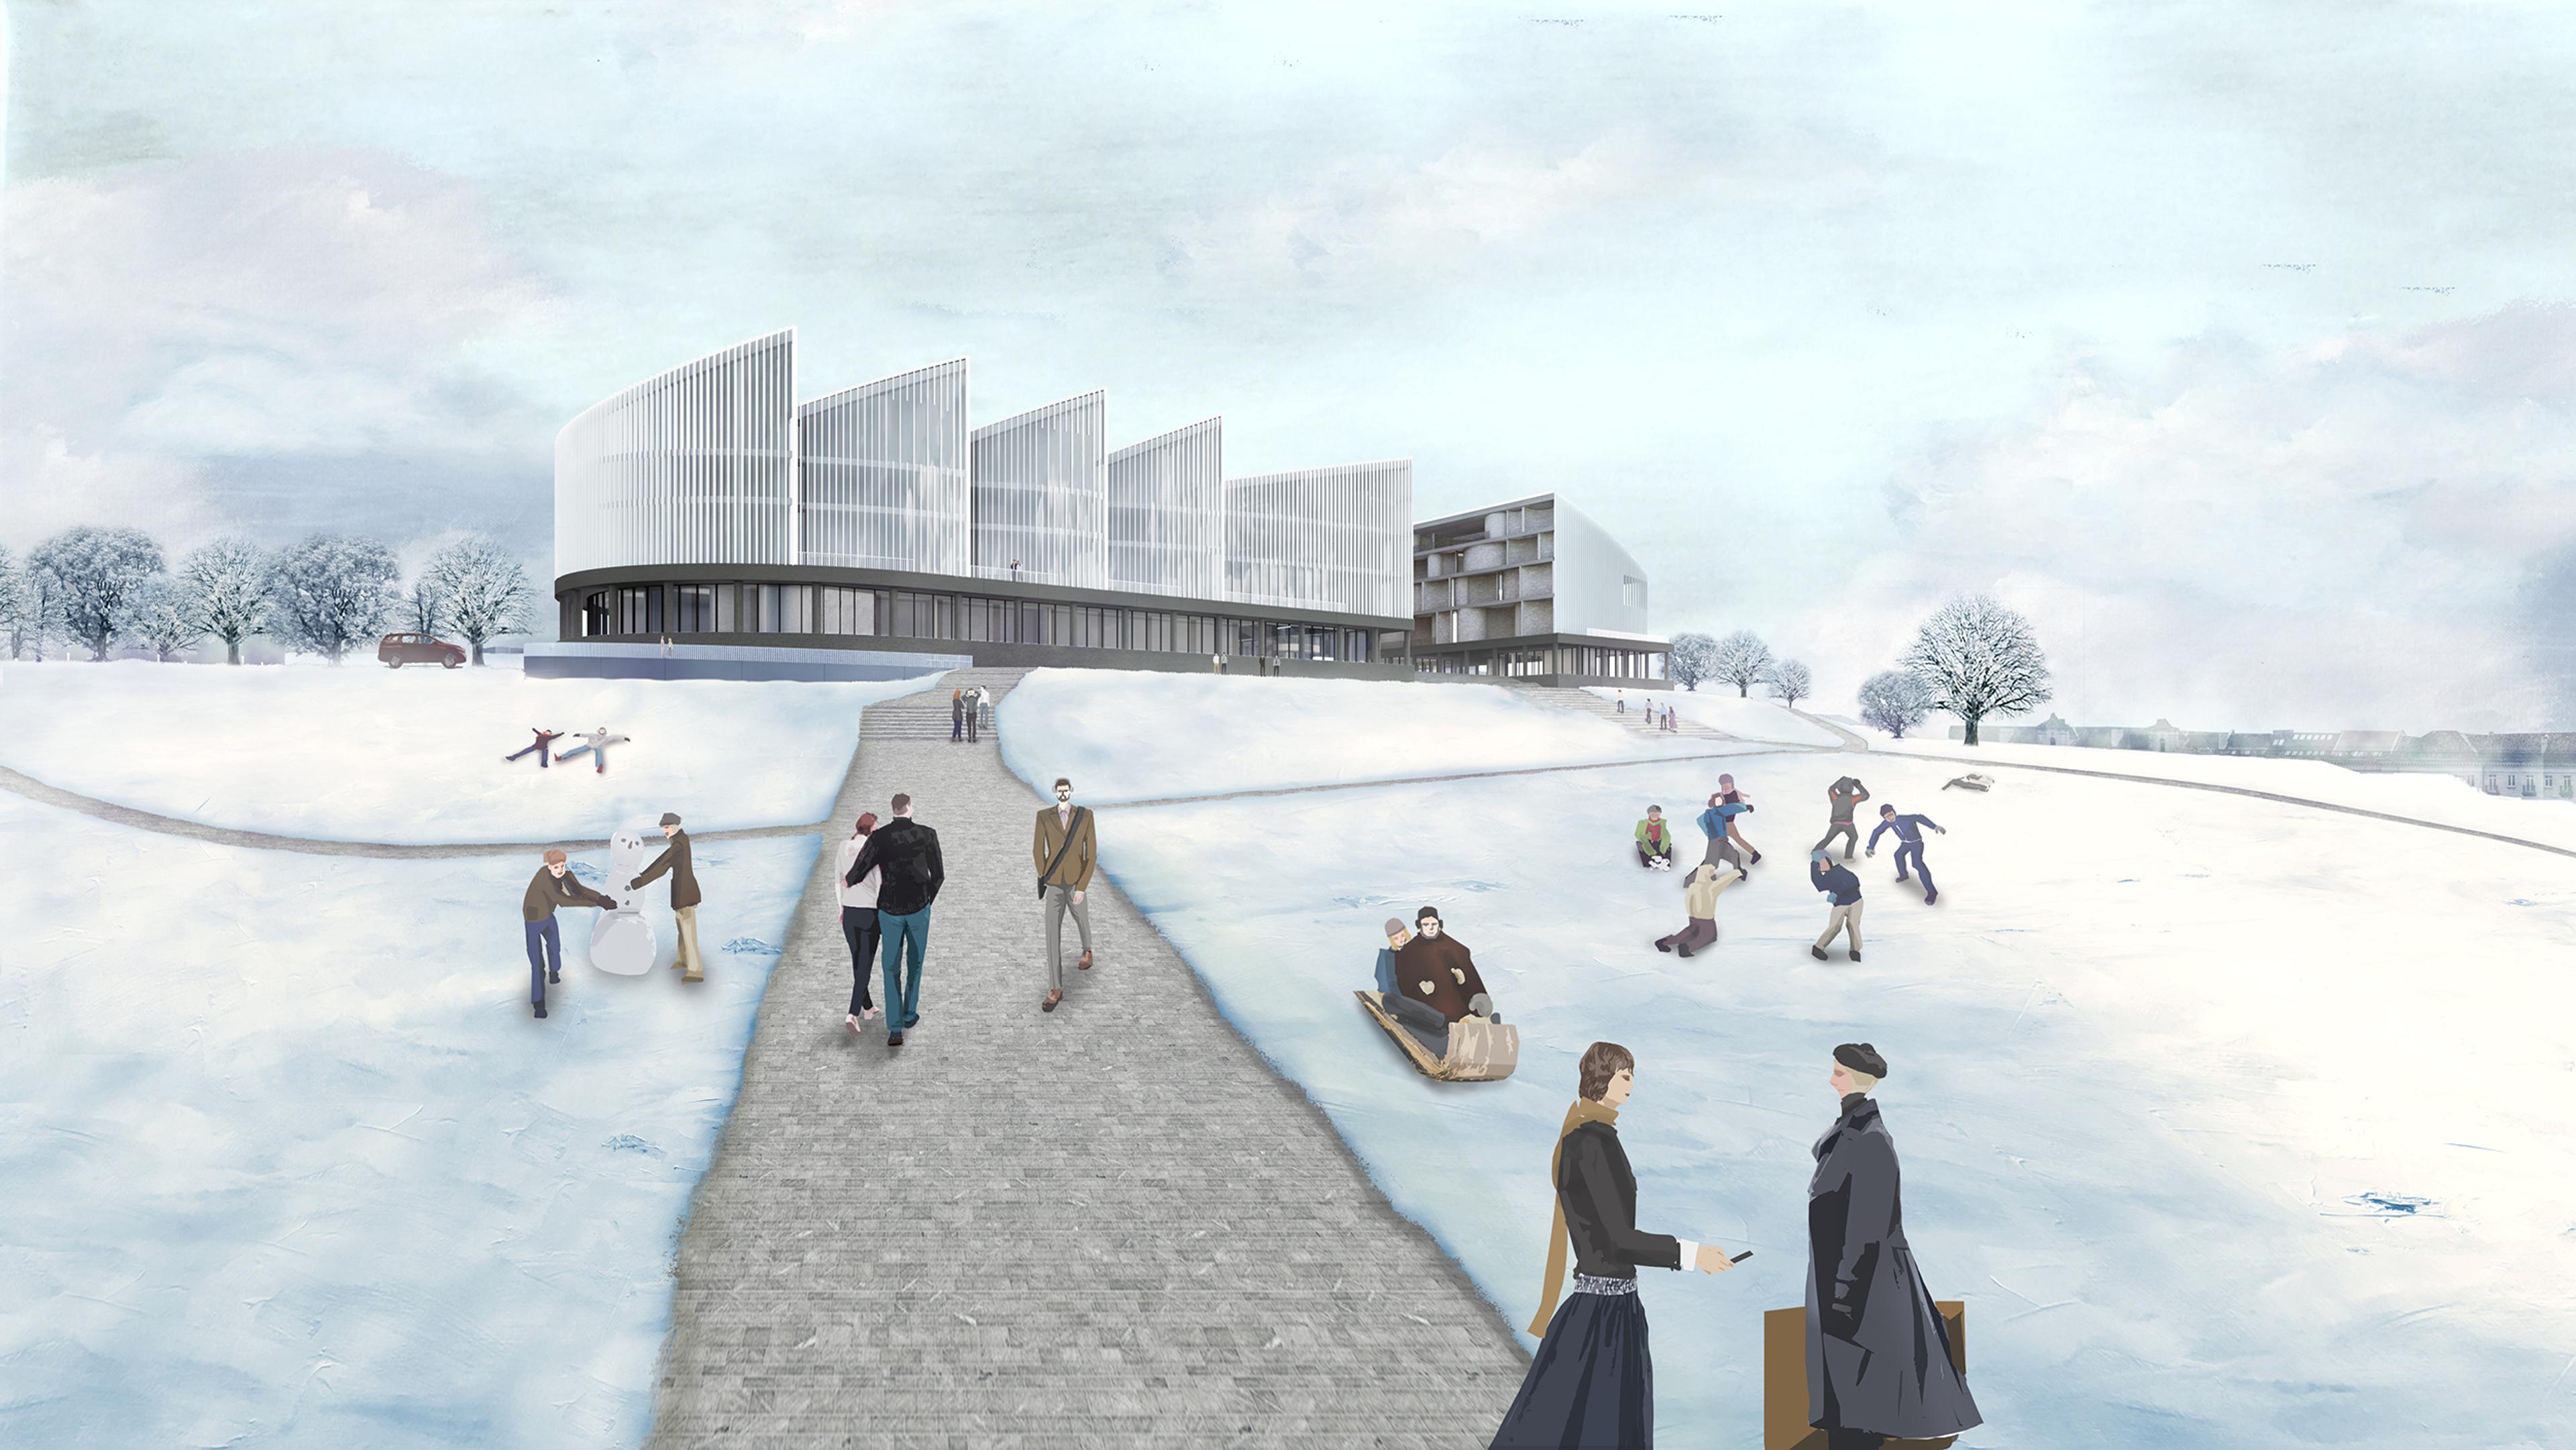 architectural rendering of proposed vilnius national concert hall with walkway in snow